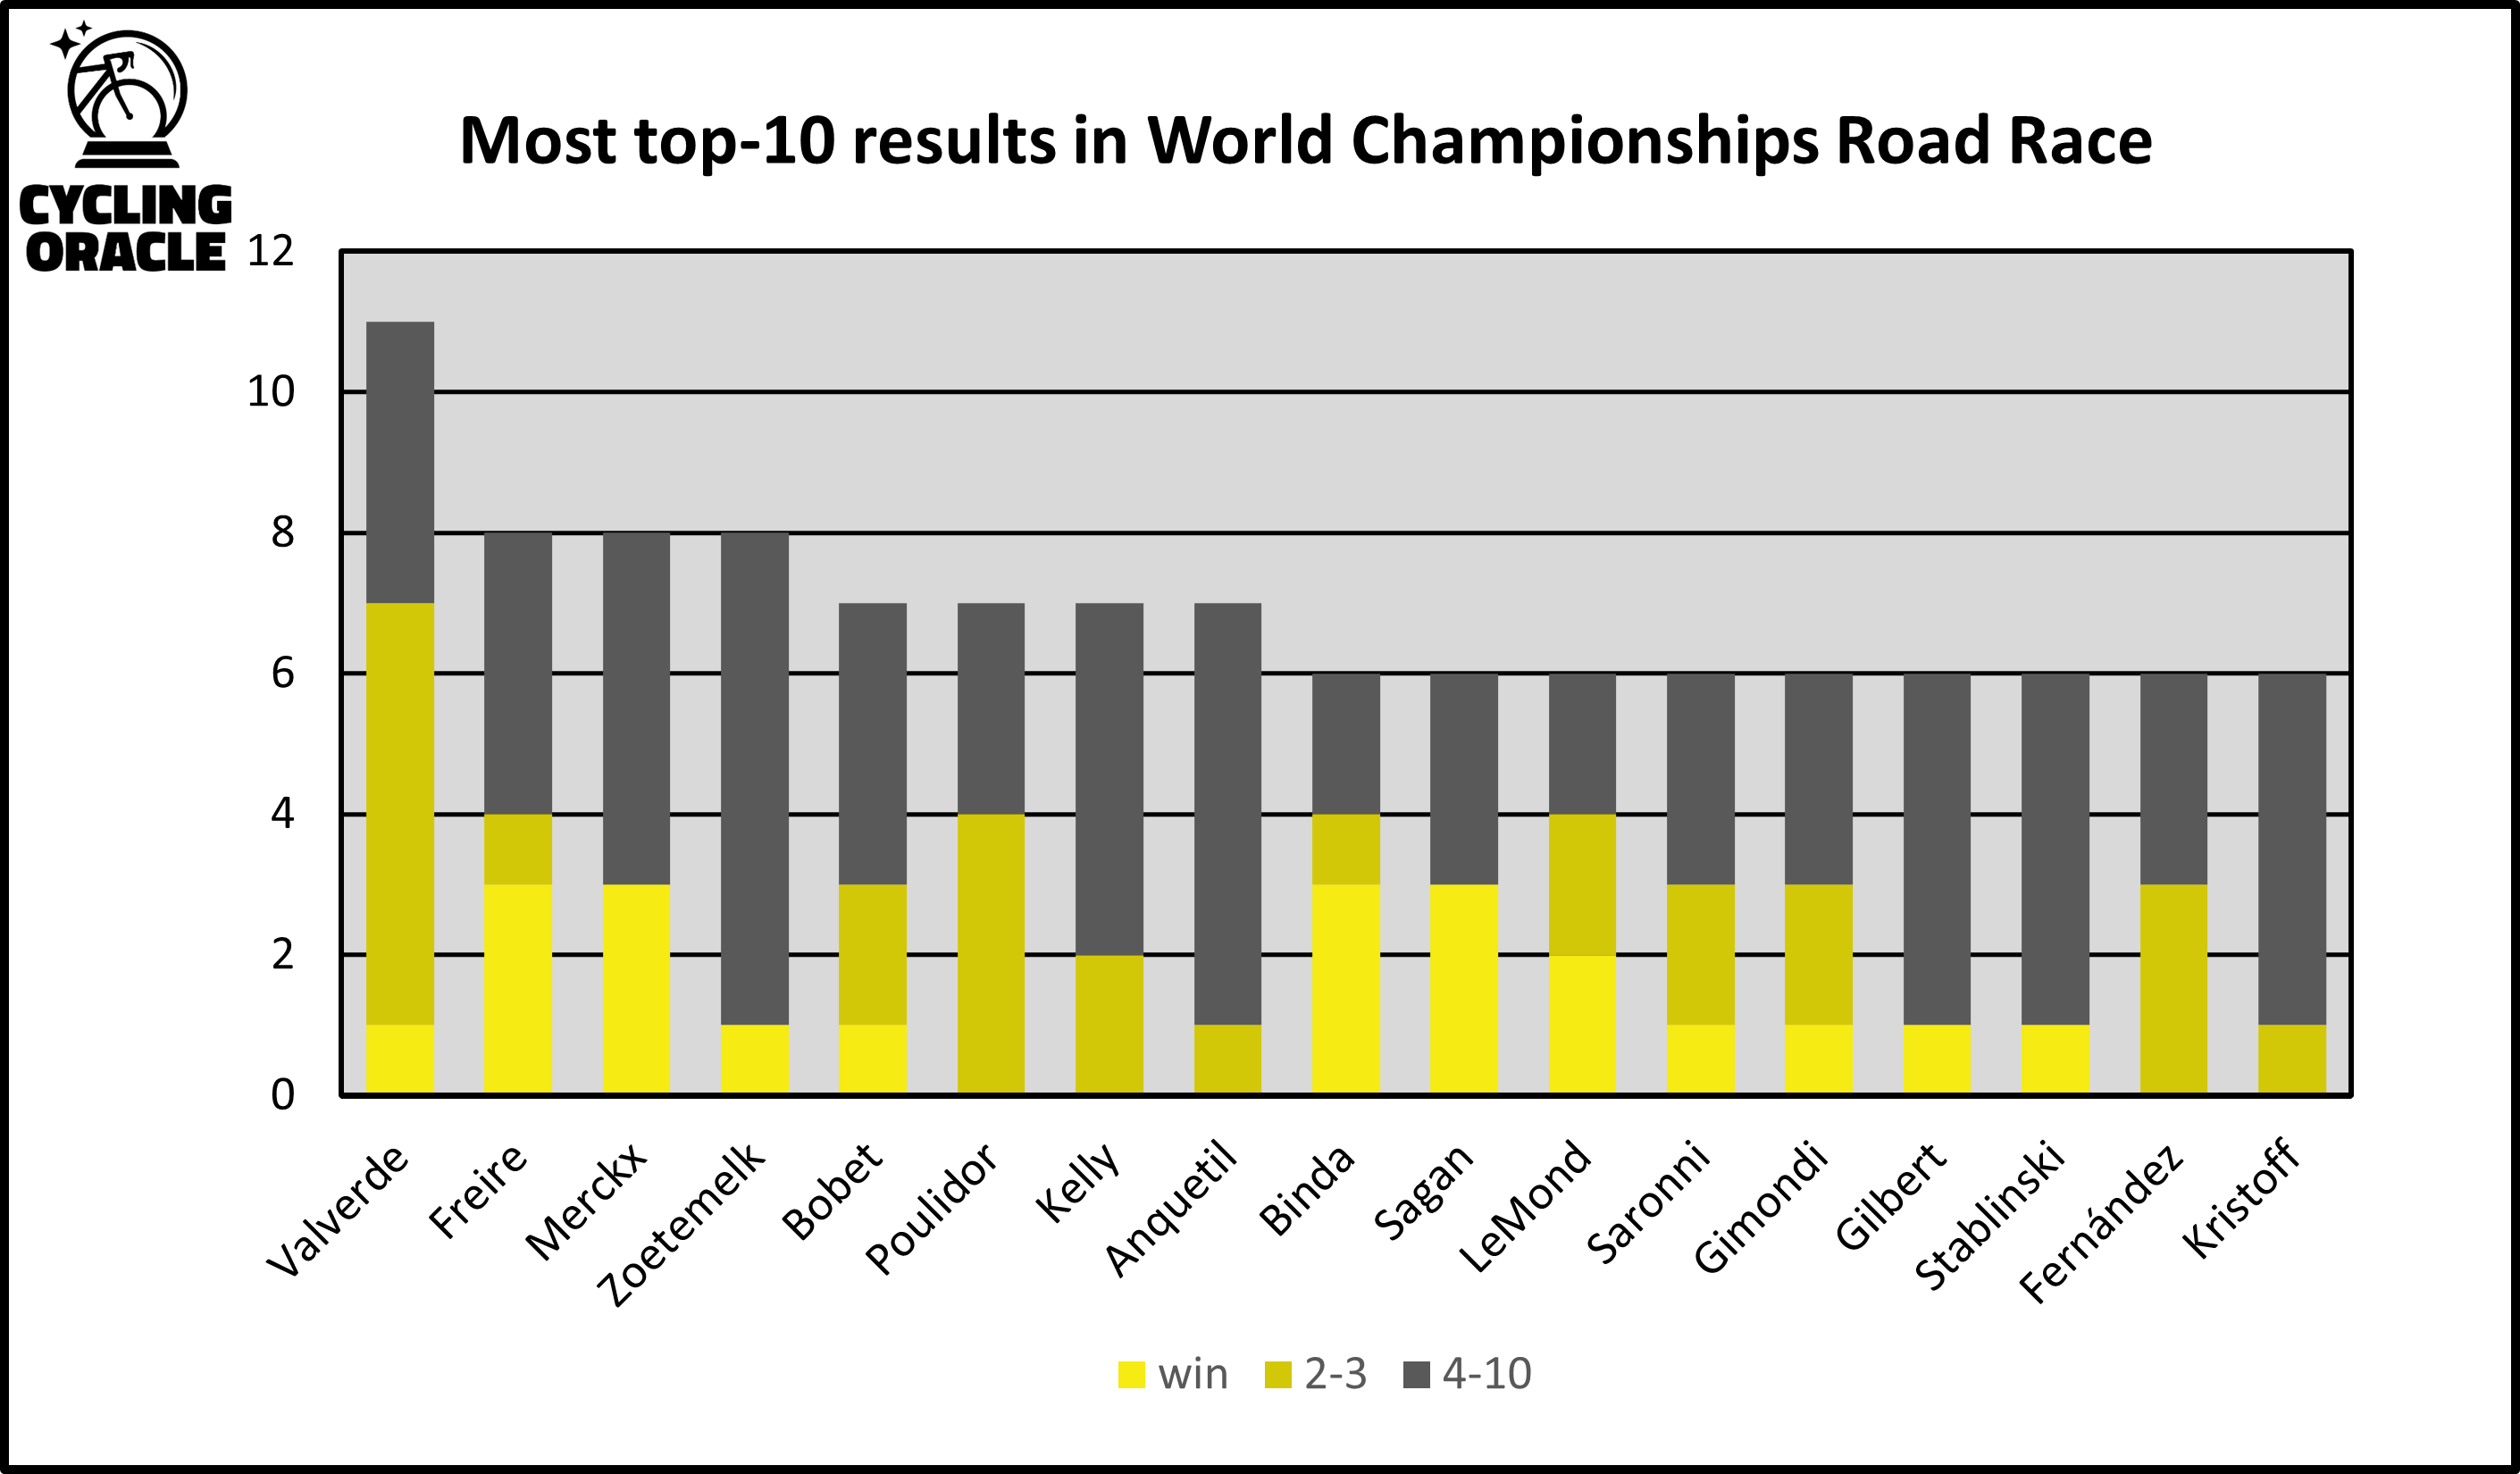 Most top-results in WC RR